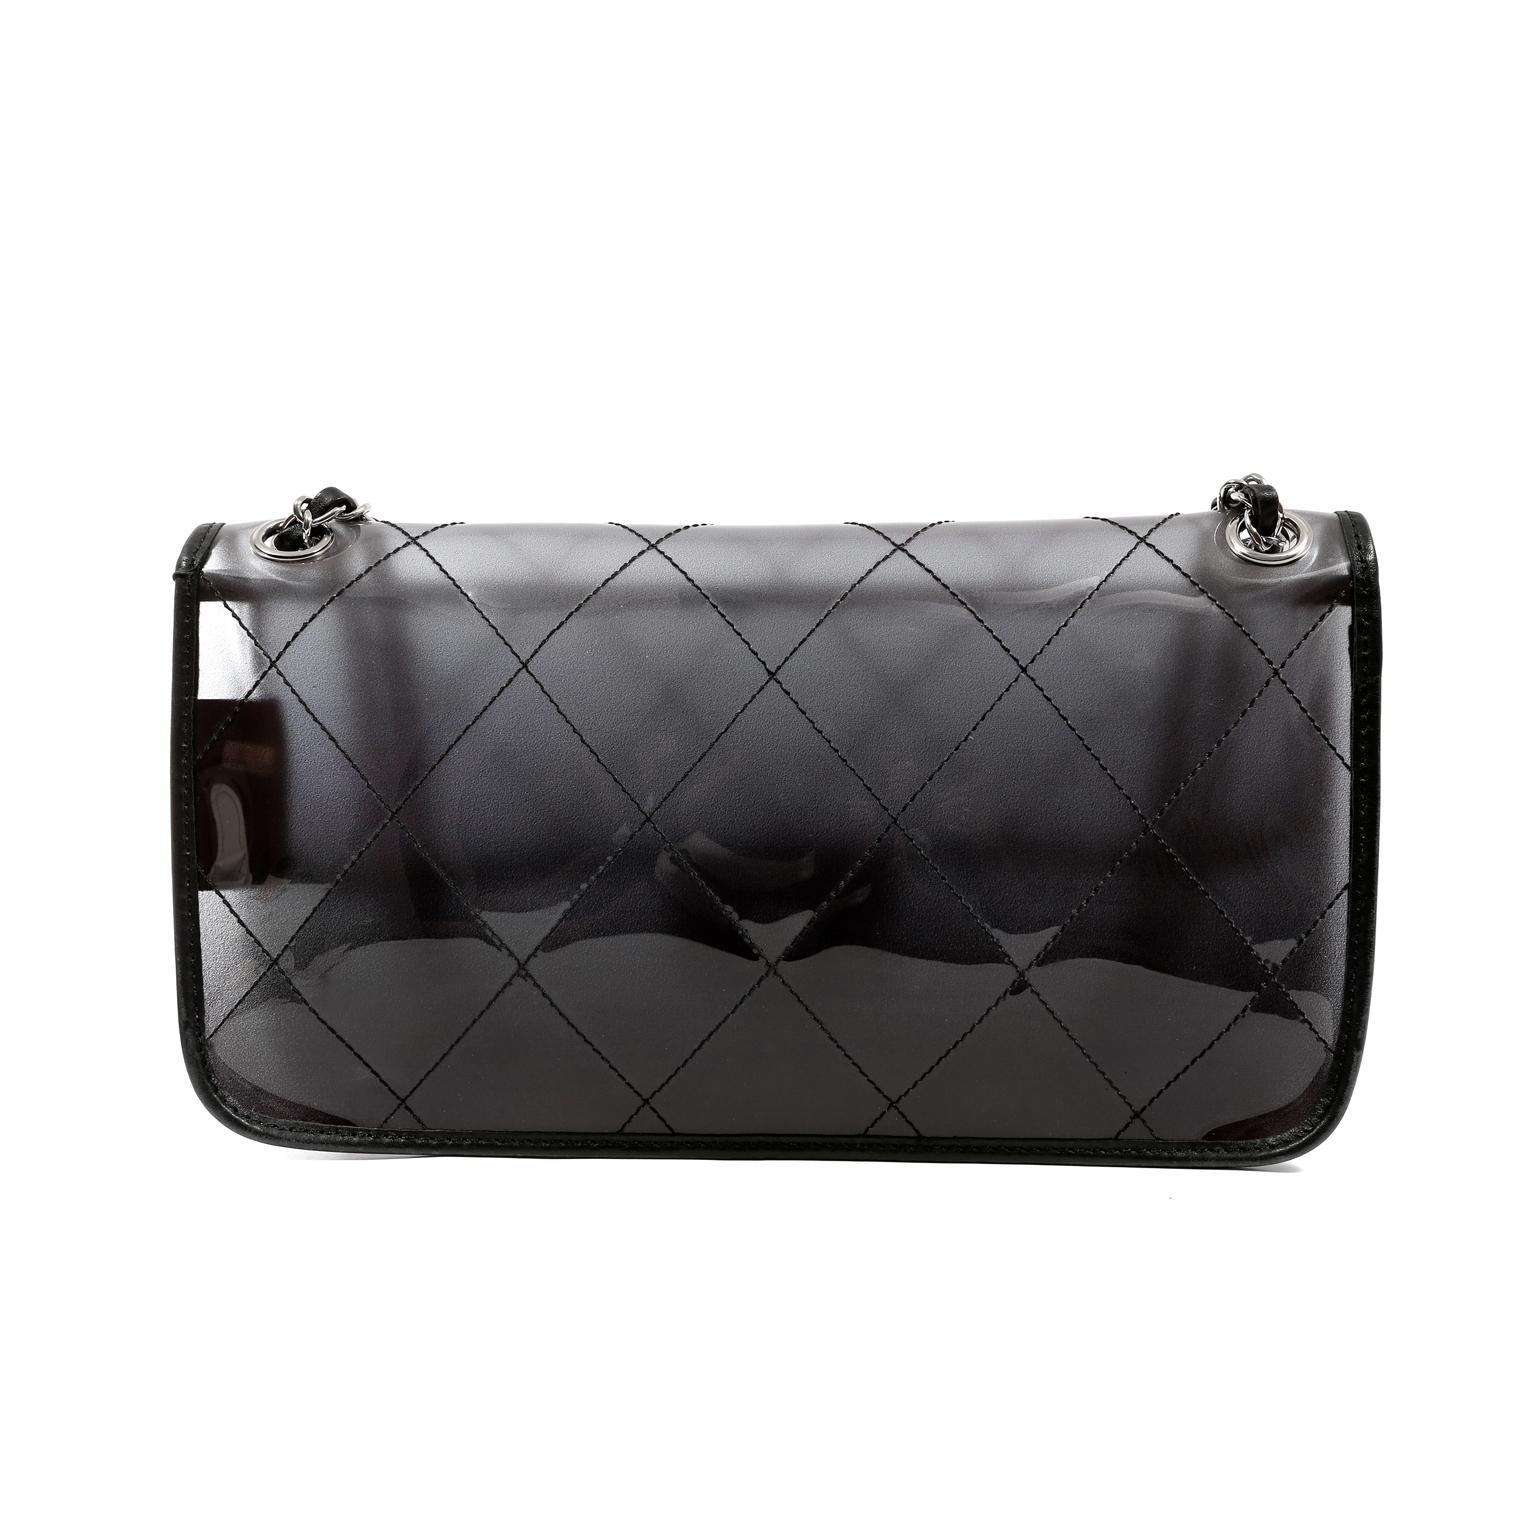 This authentic Chanel Naked Flap Bag is in very good condition.  The sporty runway style is a must have for collectors. Smoked PVC flap bag is stitched in signature Chanel diamond pattern. Black leather trimmings and silver hardware accents.